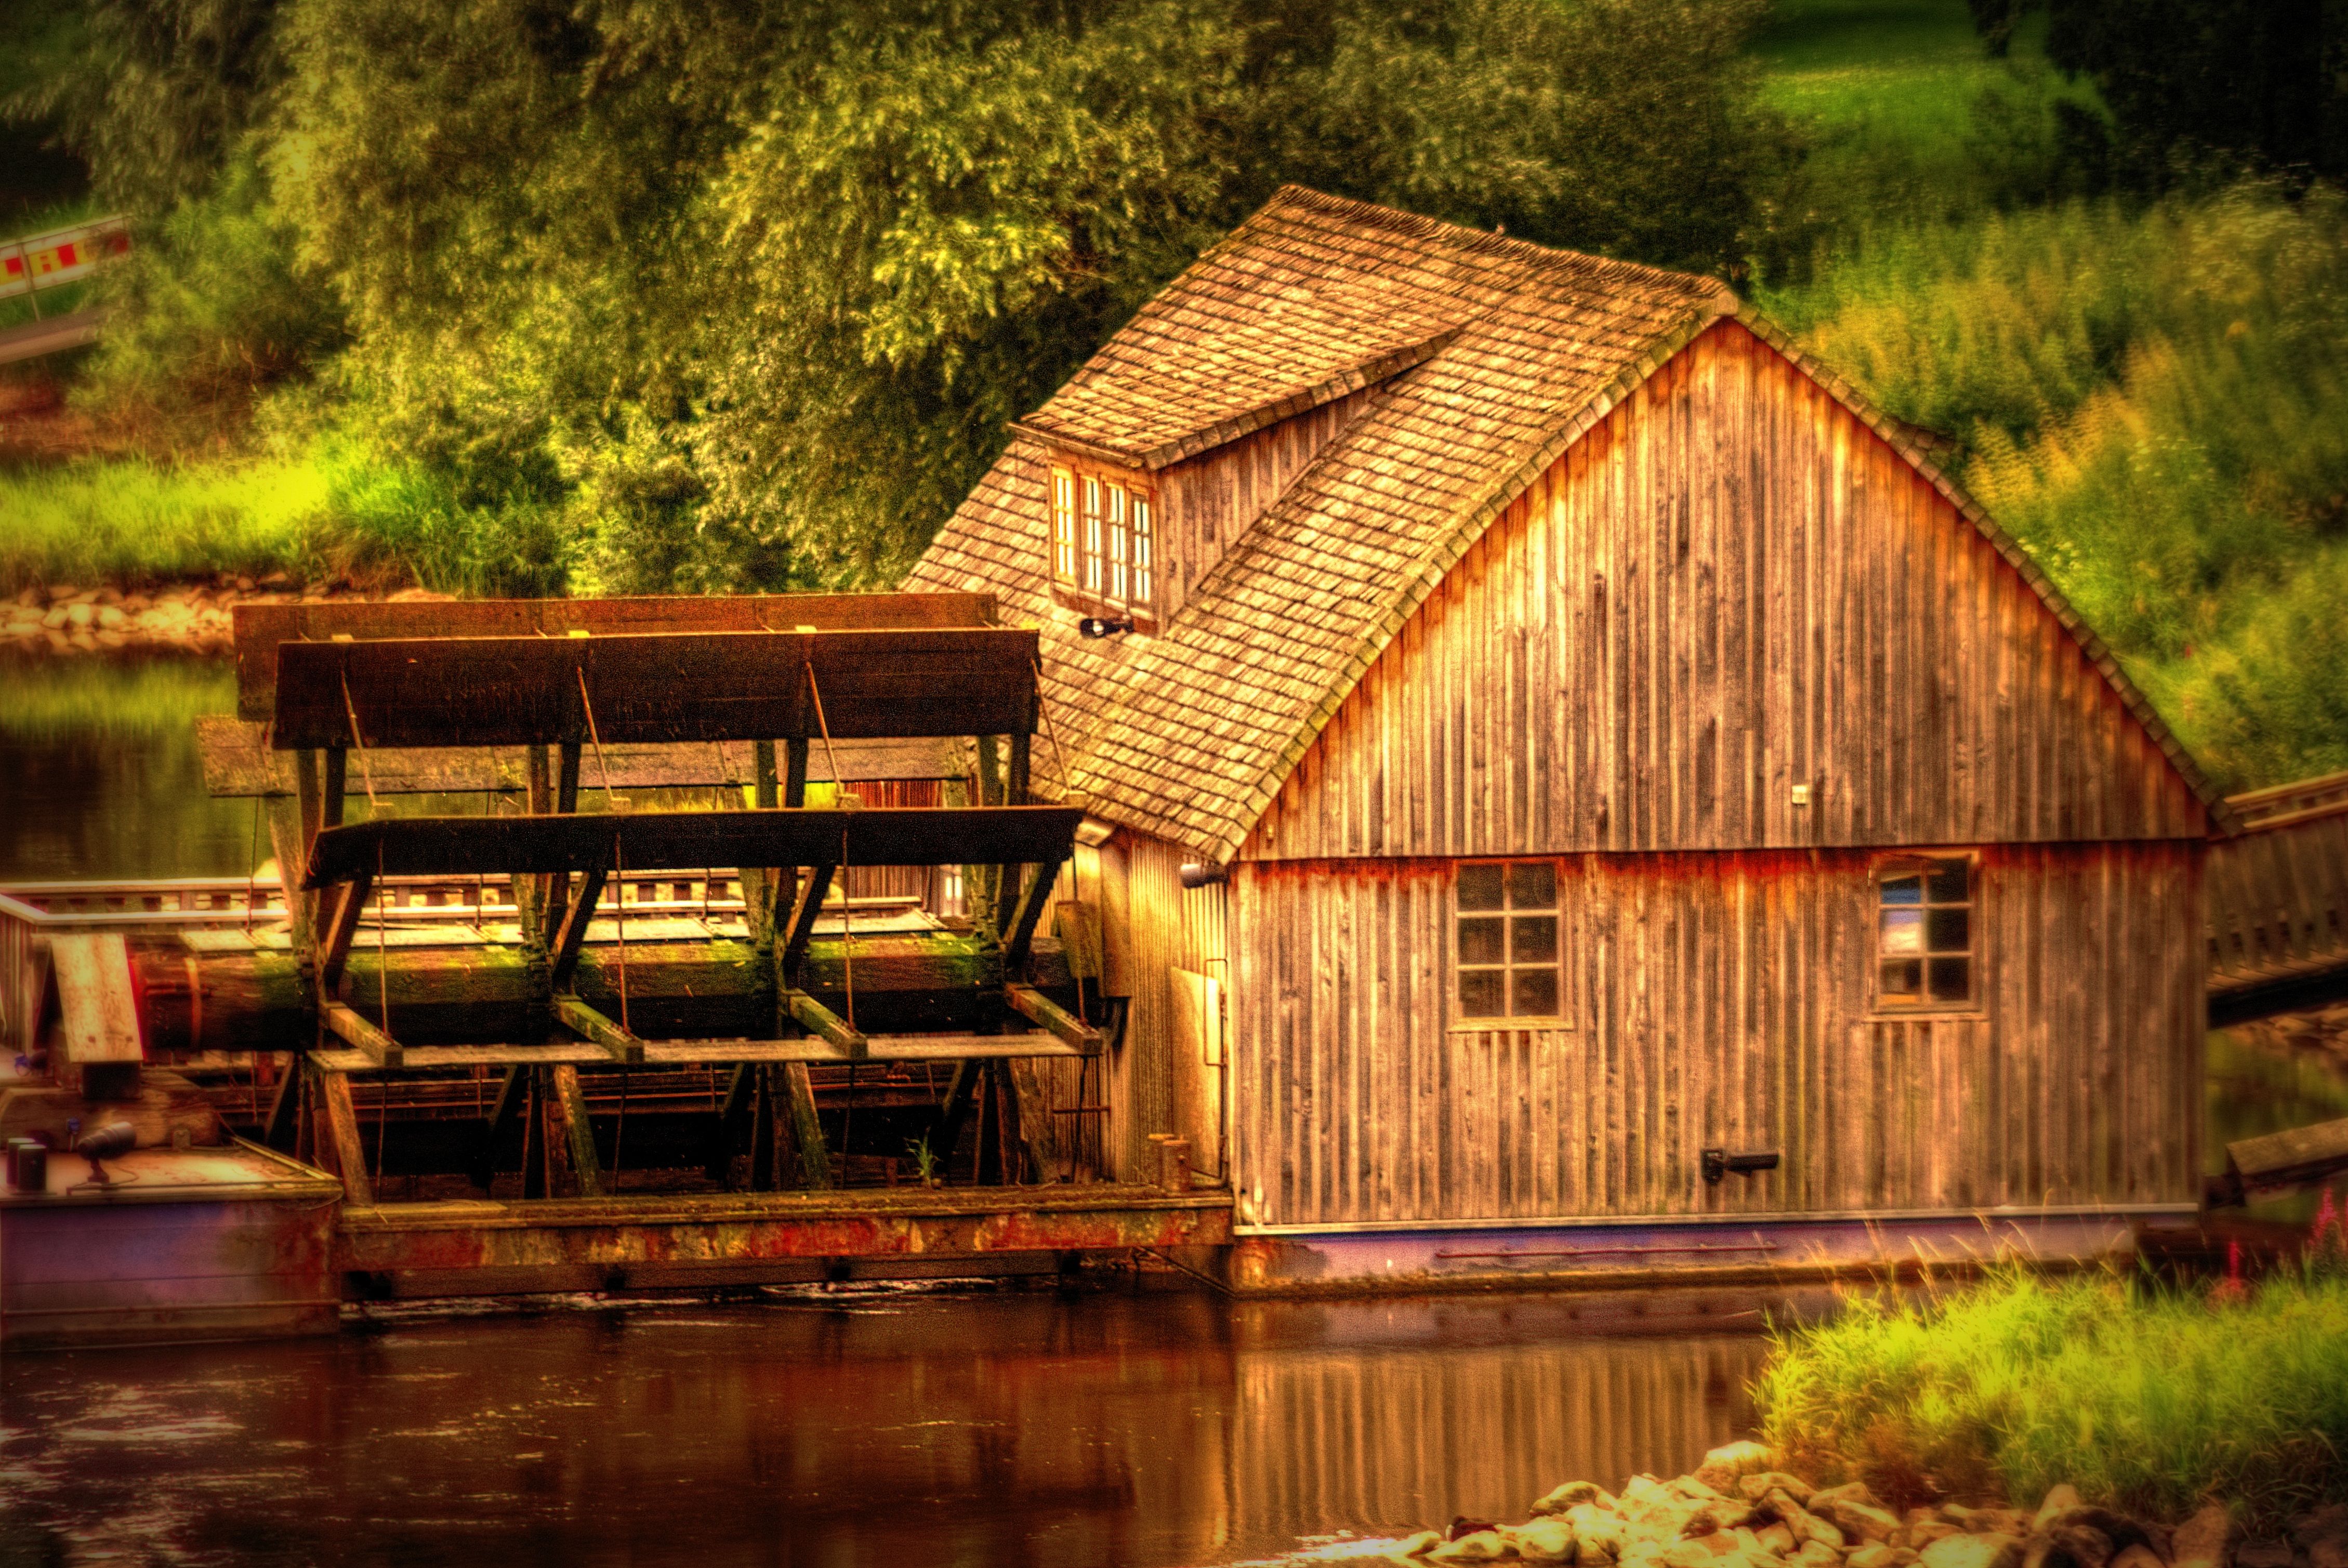 Hdr Watermill 4518x3017